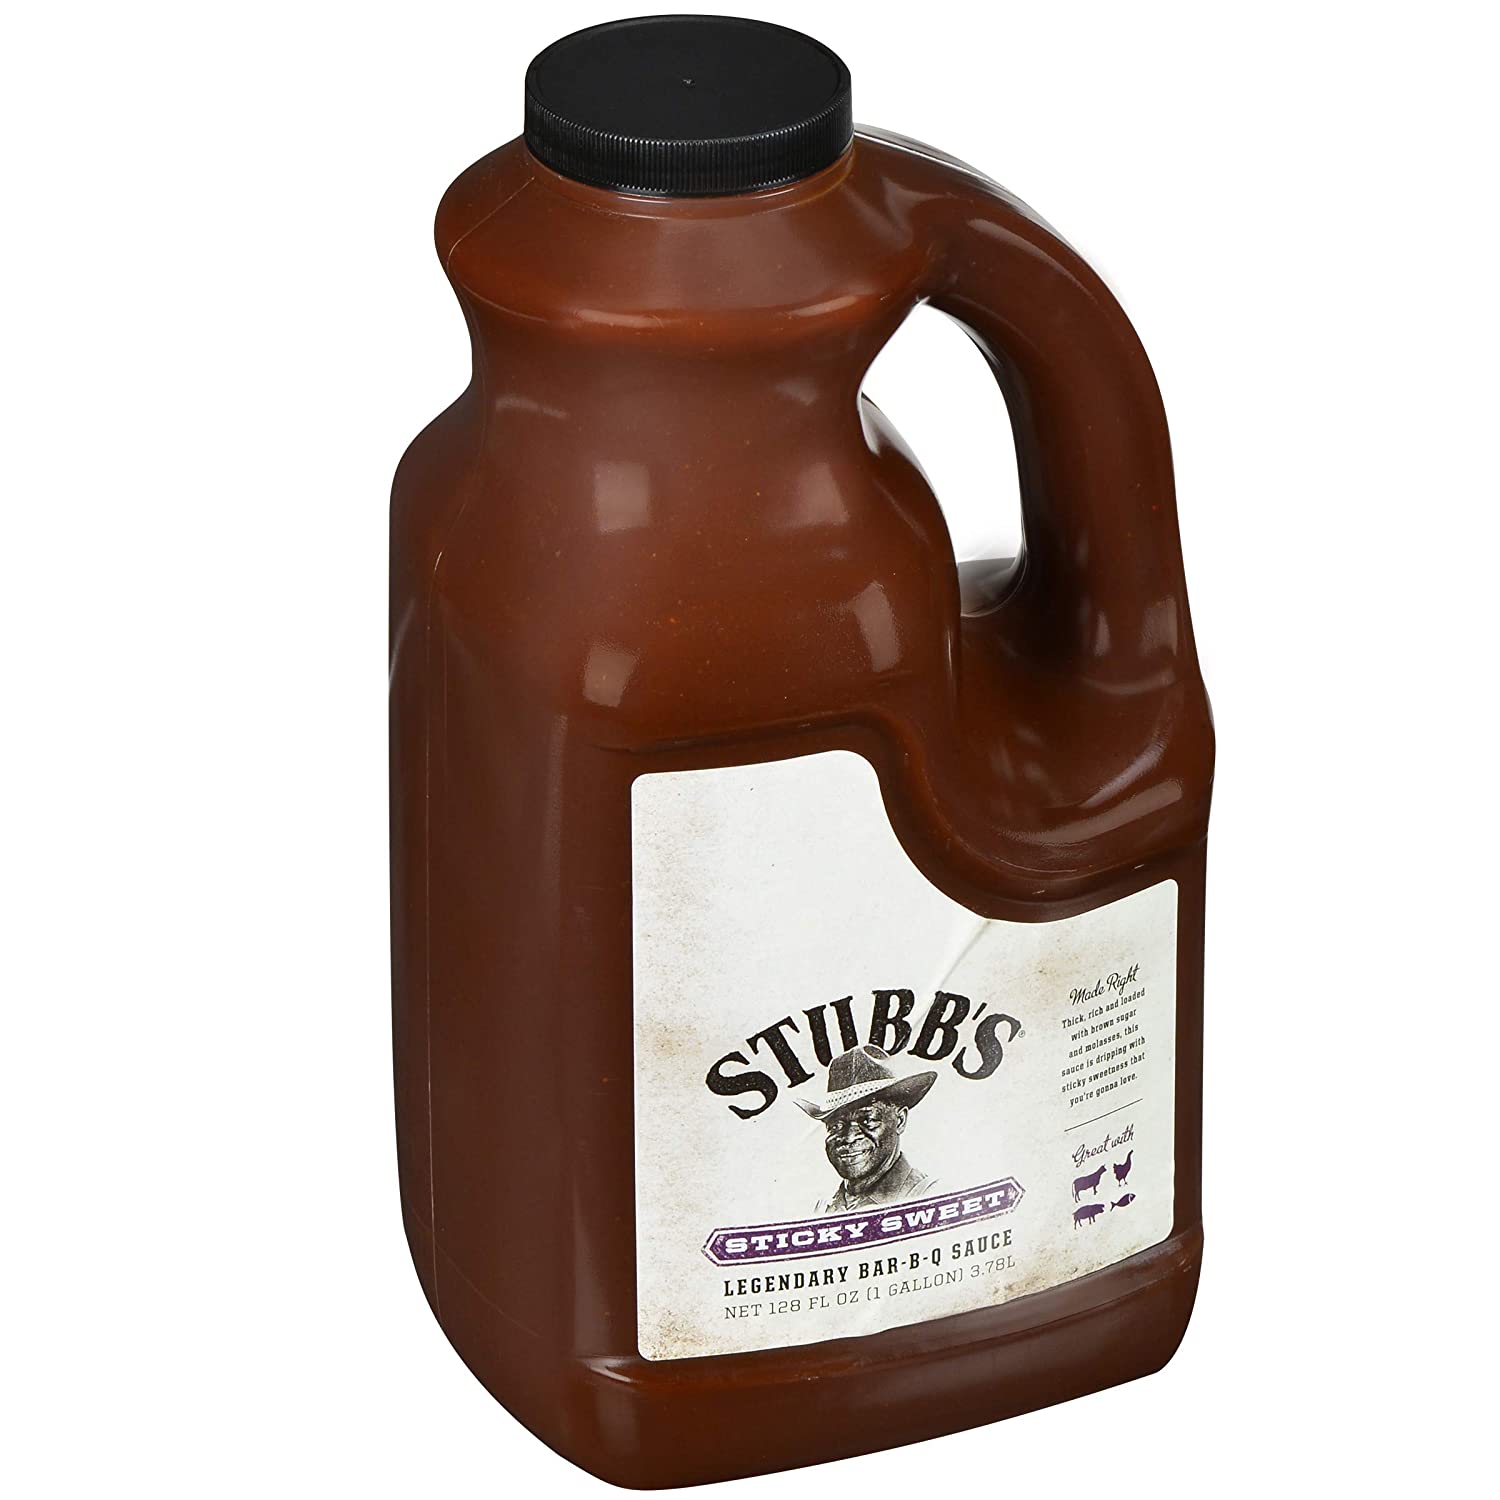 Amazon: Stubb's Sticky Sweet Legendary Bar-B-Q BBQ Sauce, 1 gal, Less w/15% SS + Free Prime Shipping Lowest Price Ever $14.2